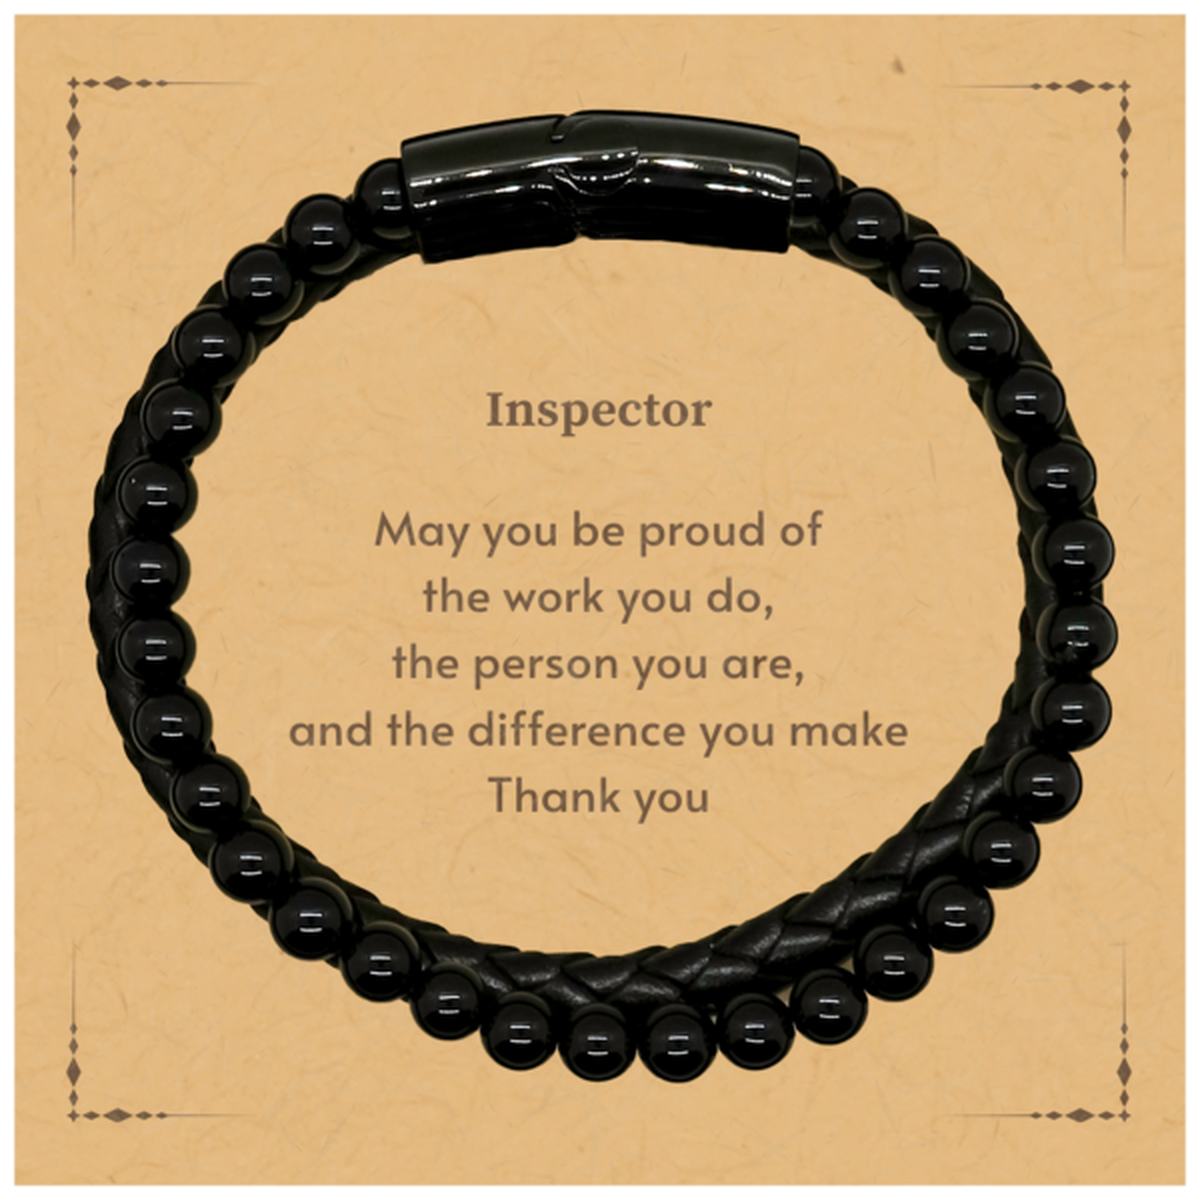 Heartwarming Stone Leather Bracelets Retirement Coworkers Gifts for Inspector, Inspector May You be proud of the work you do, the person you are Gifts for Boss Men Women Friends